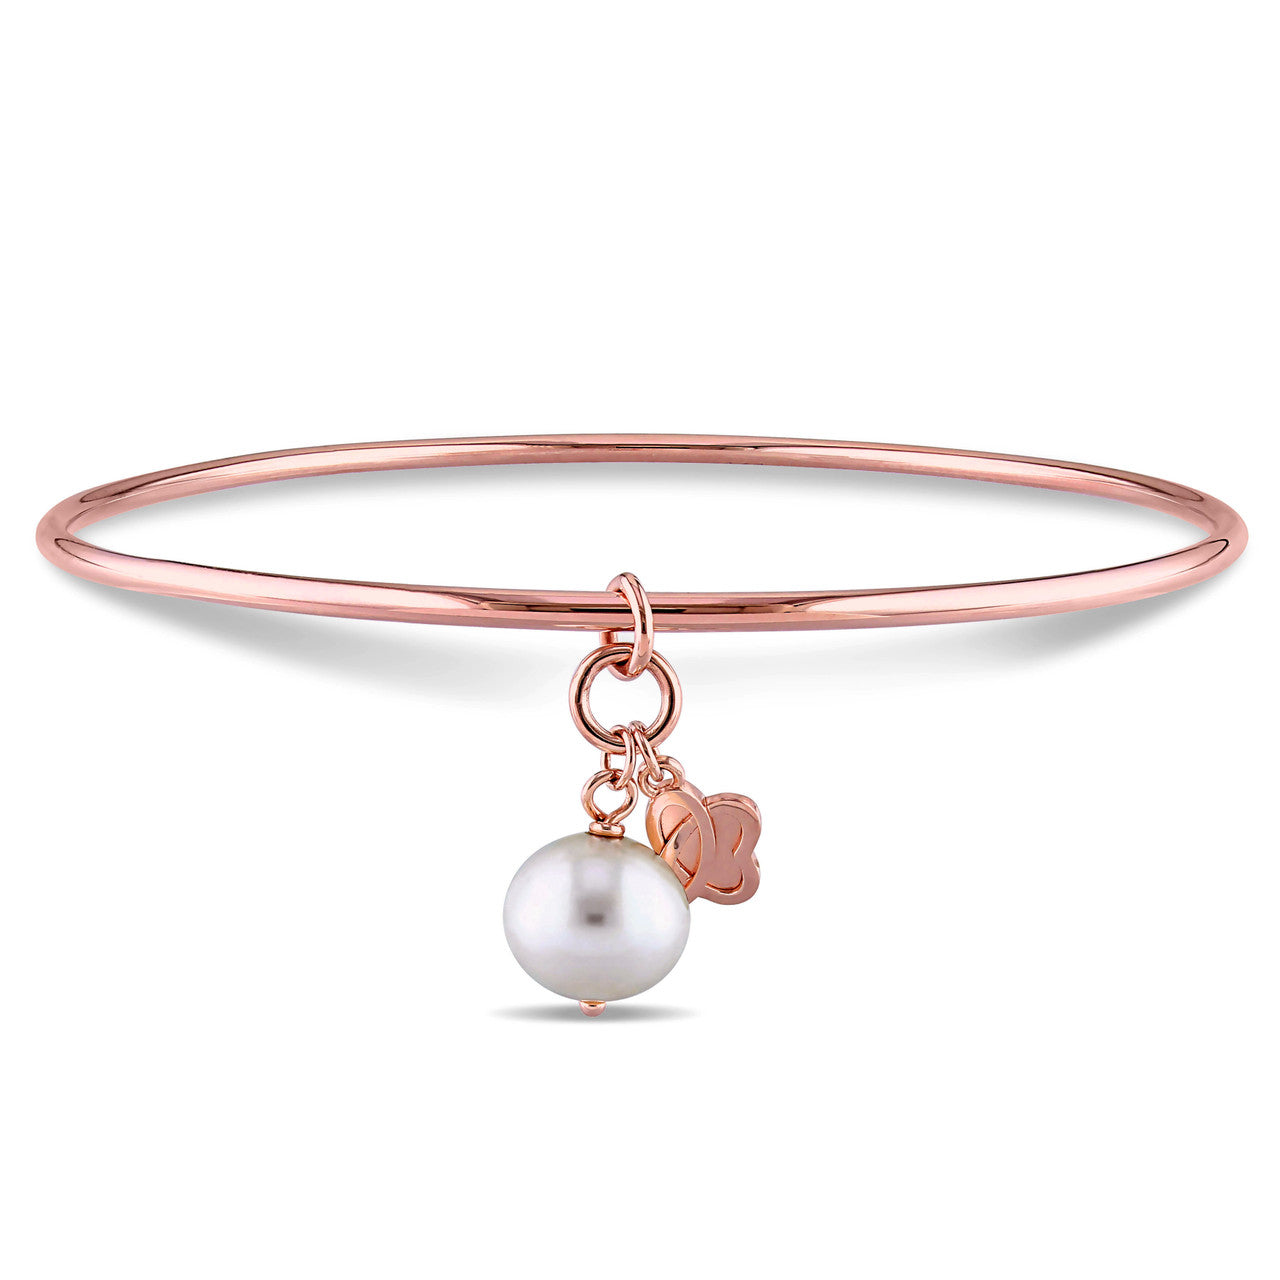 Julianna B Cultured Freshwater Pearl Bangle in 18K Rose Plated Sterling Silver - 75000002069 | Ice Jewellery Australia